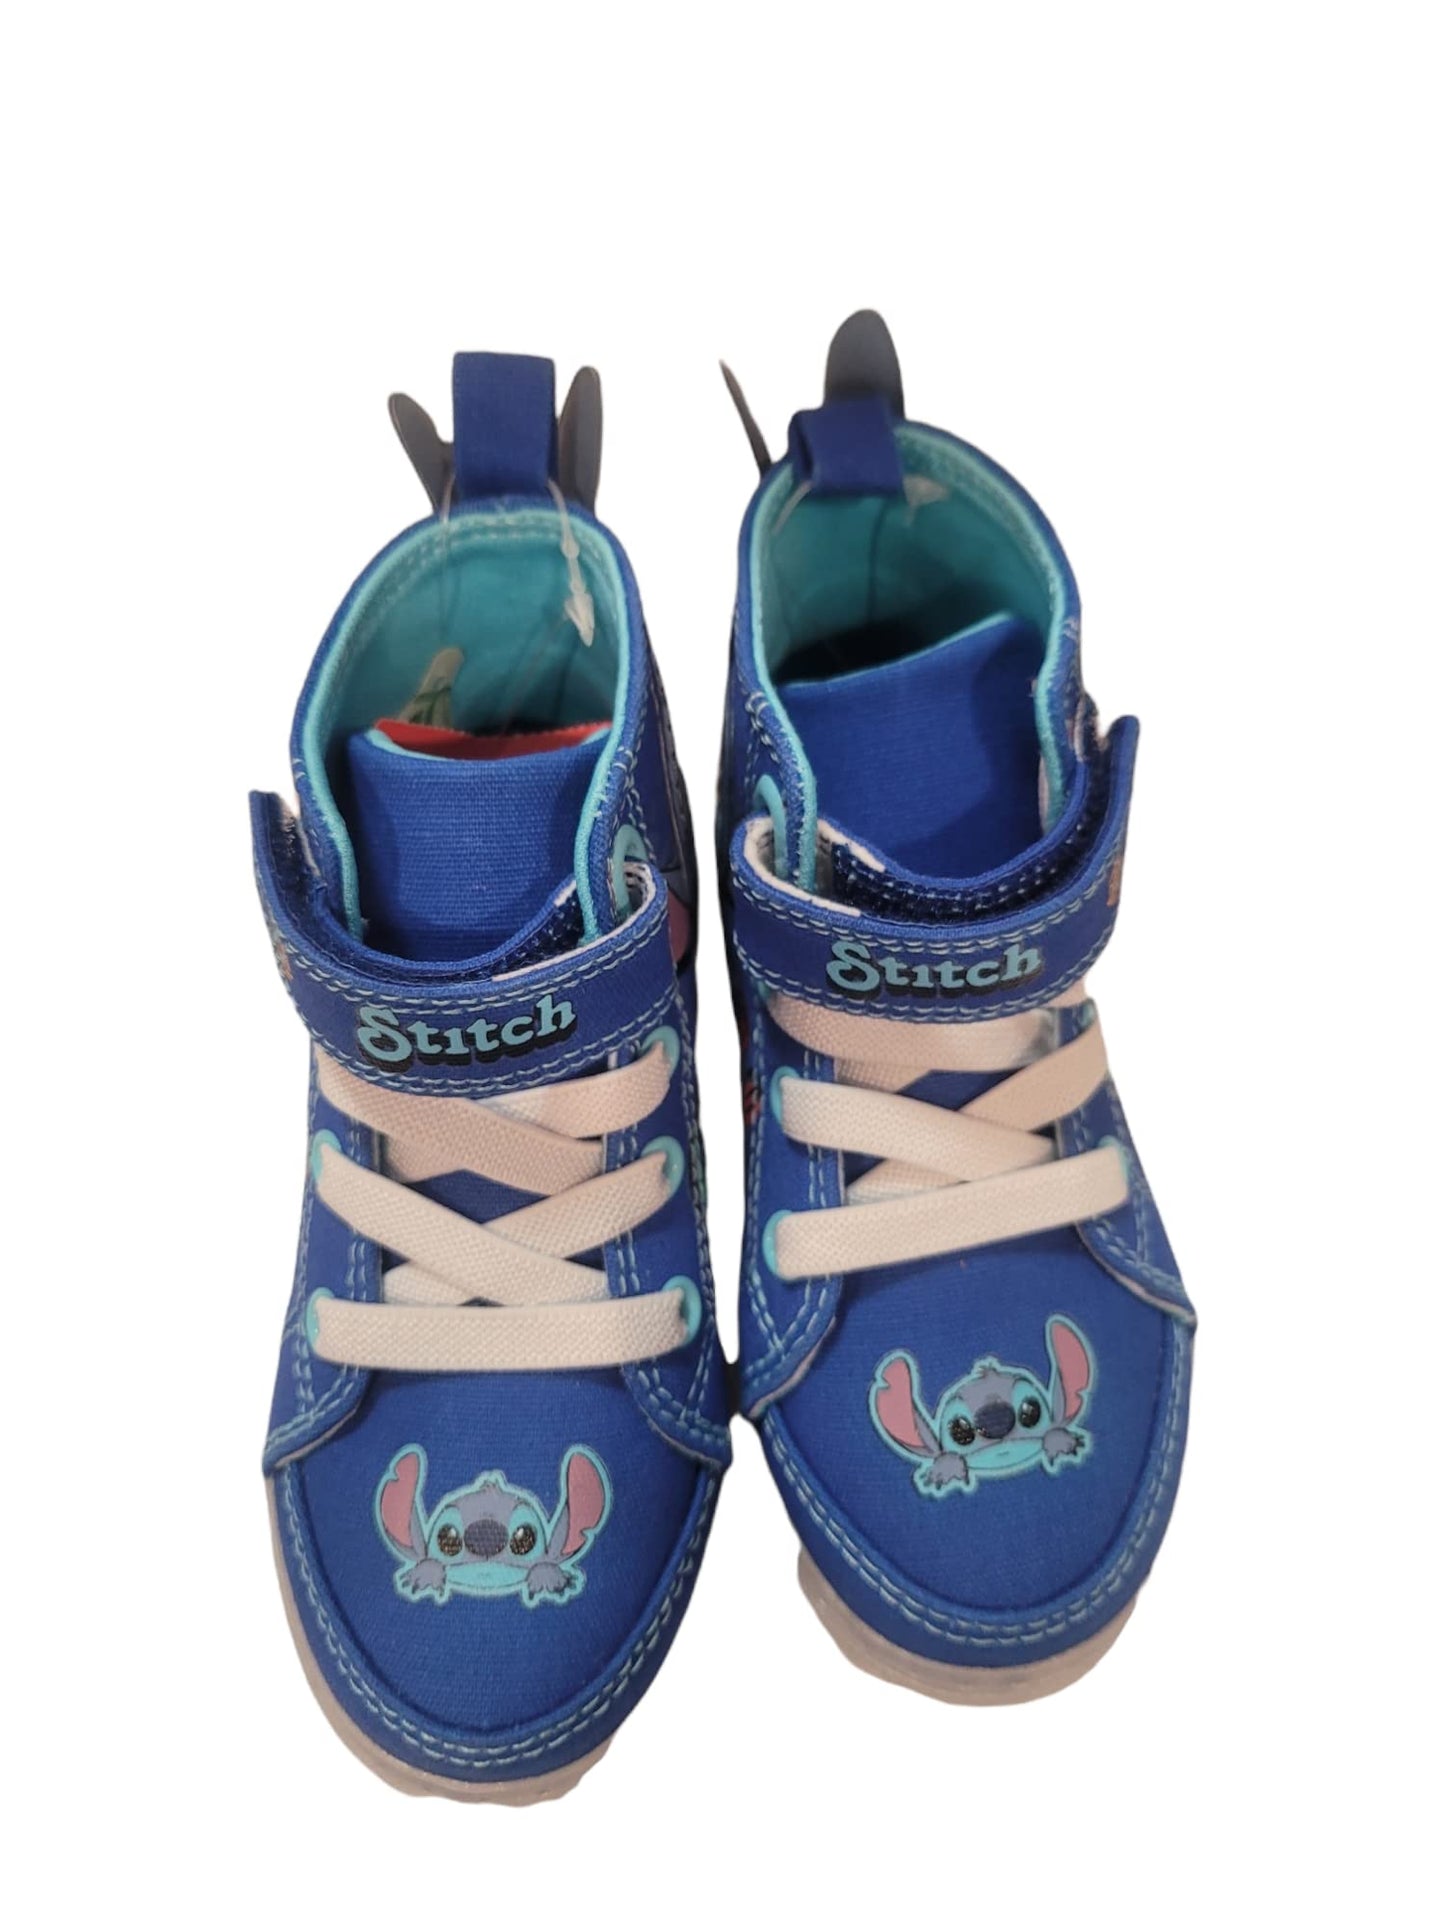 Disney Lilo and Stitch Hi Top Lighted Blue Sneaker (Toddler/Little Kid)